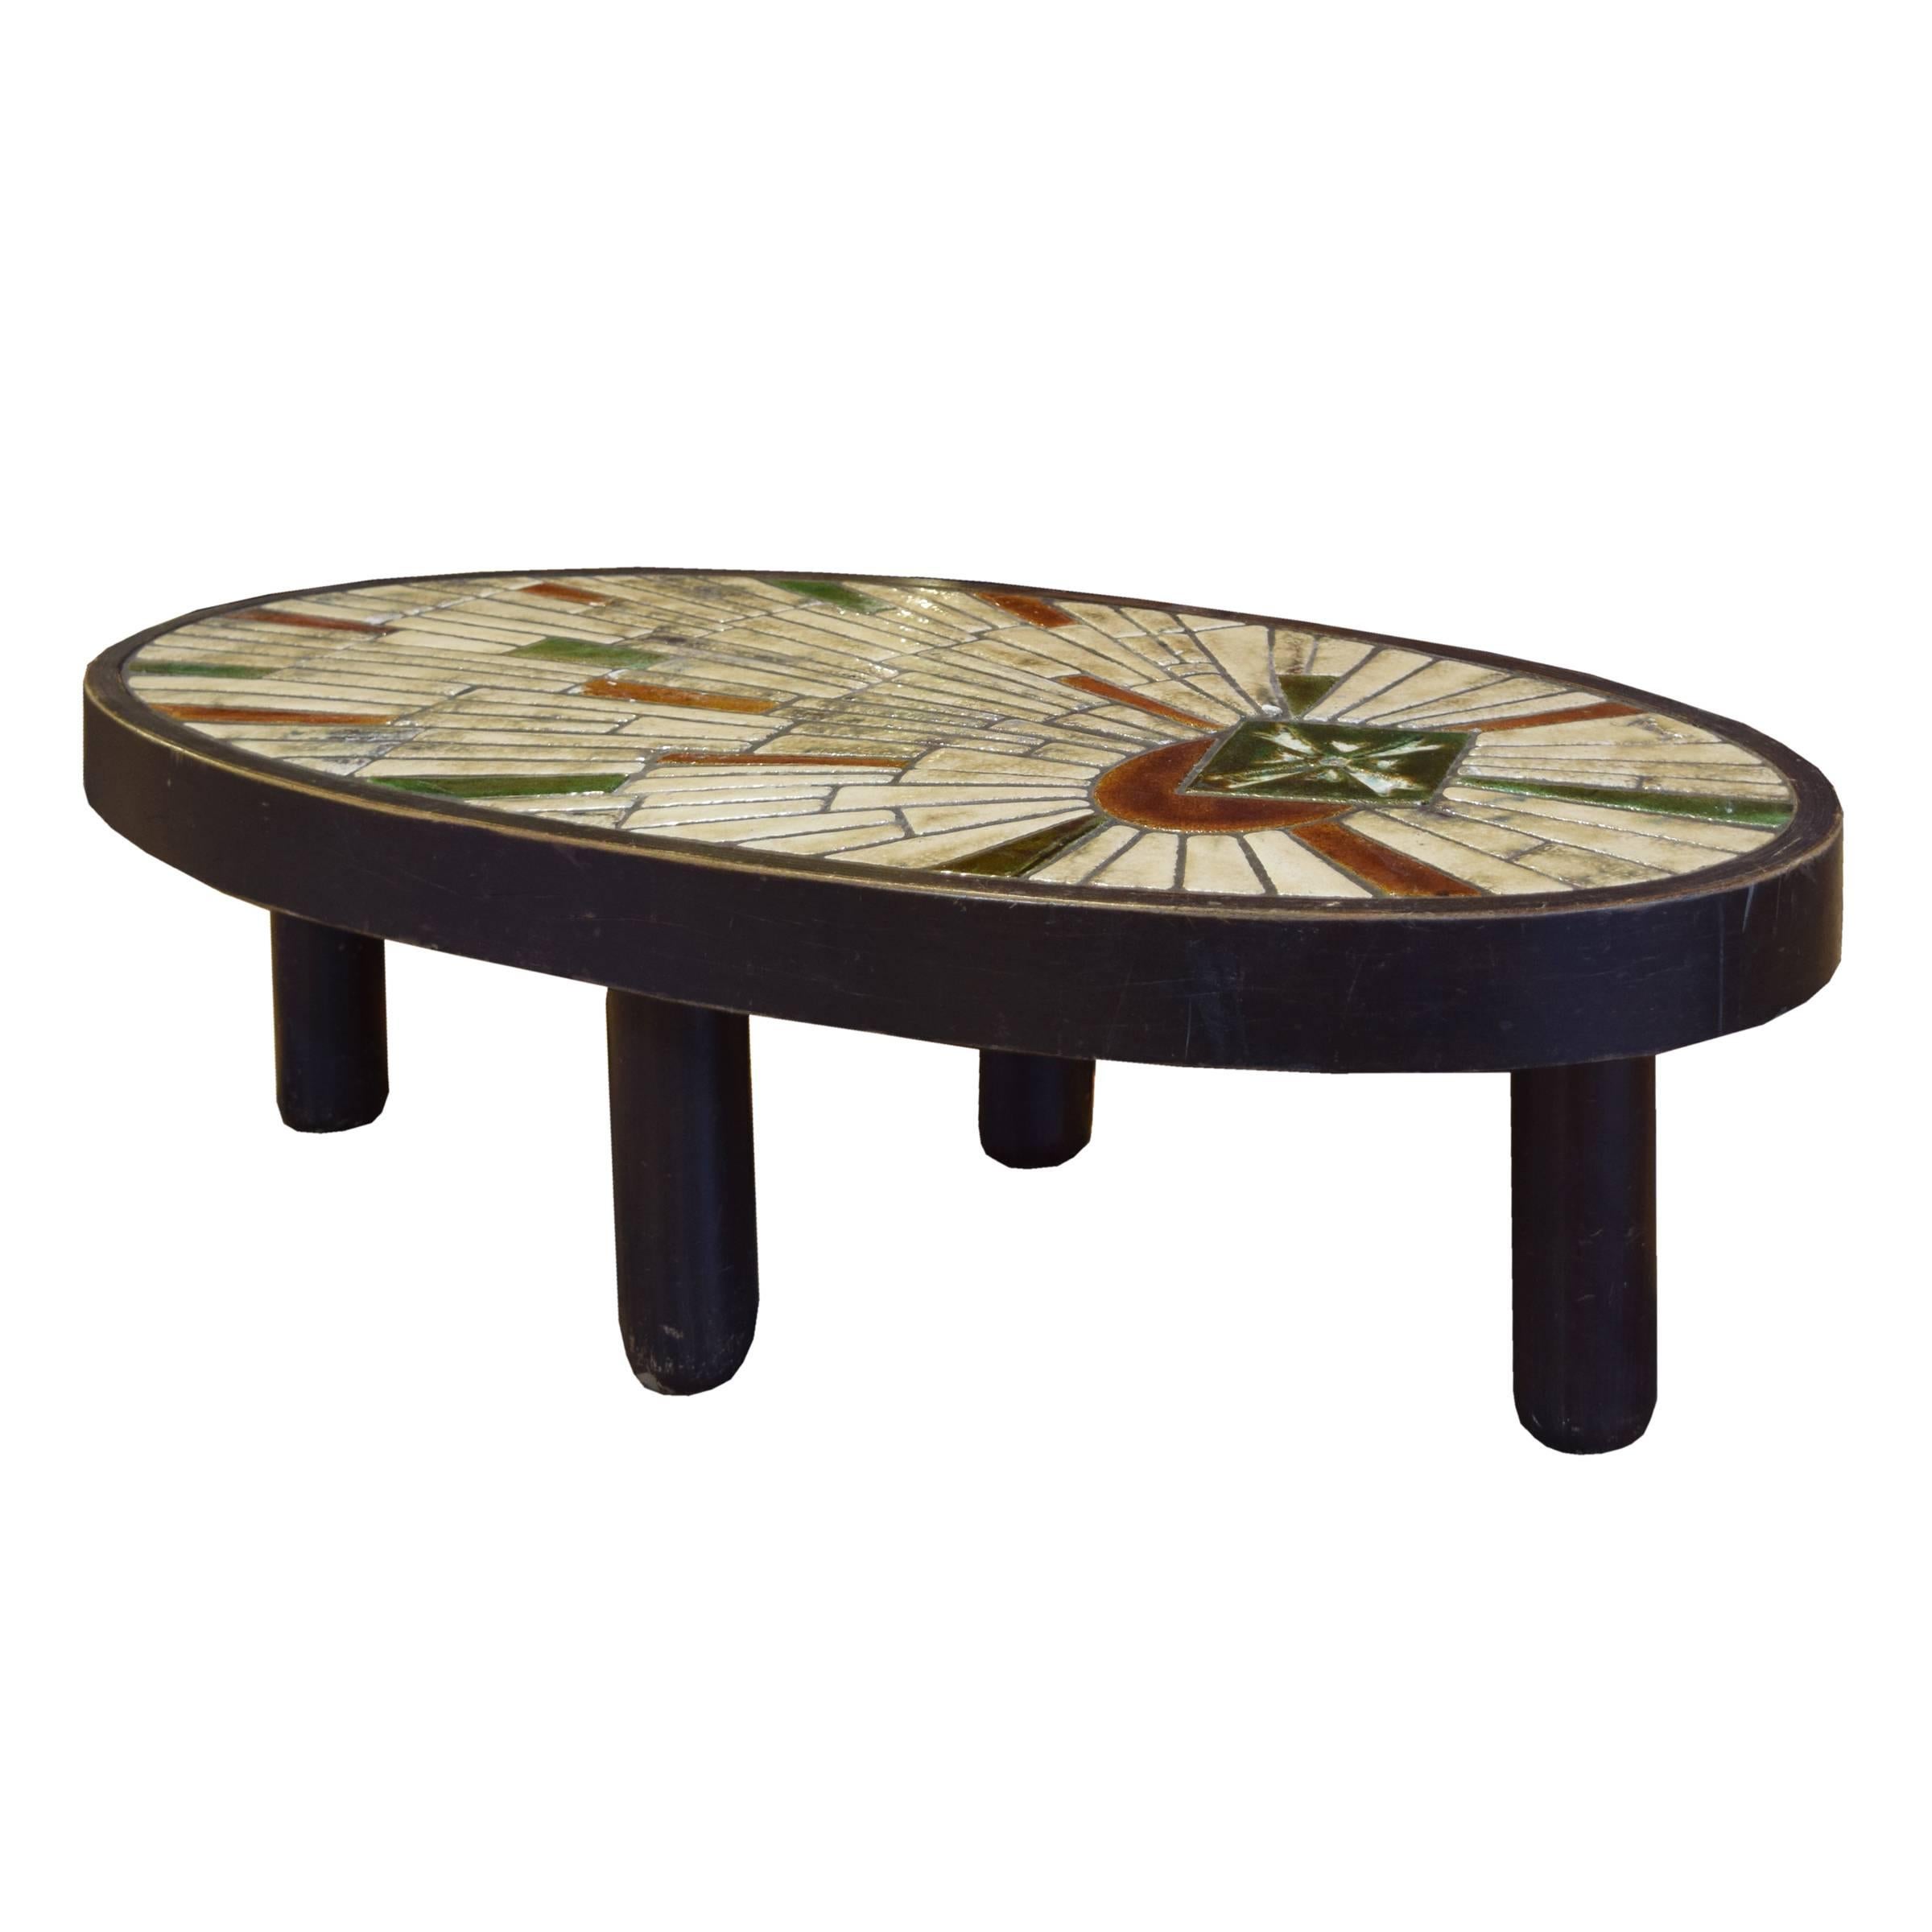 A fun midcentury wood oval table with four legs and a colorful mosaic tile-top by Barrois for Vallauris, signed 'Barrois'. Vallauris, on the southeastern coast of France, was also where Picasso developed his love of ceramics on the early 1950s.